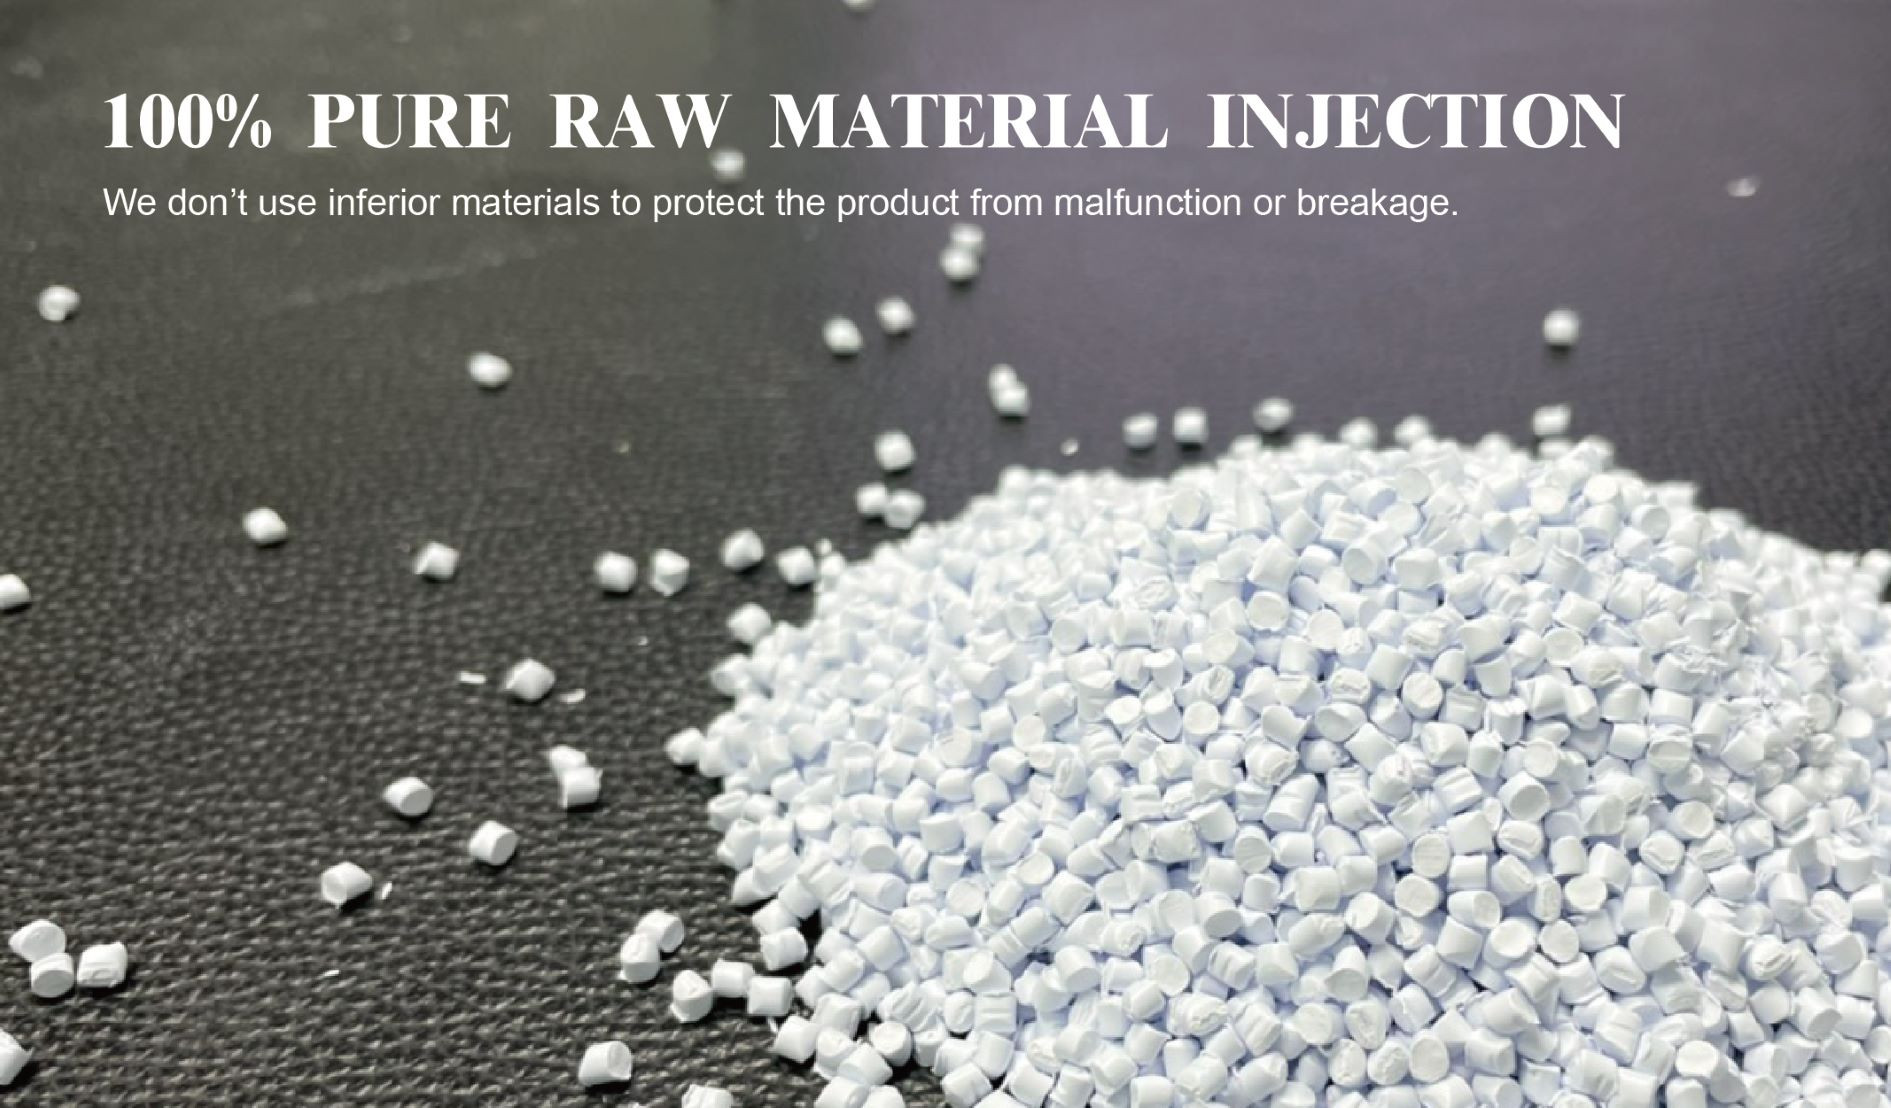 FILTER 100% PURE RAW MATERIAL INJECTION